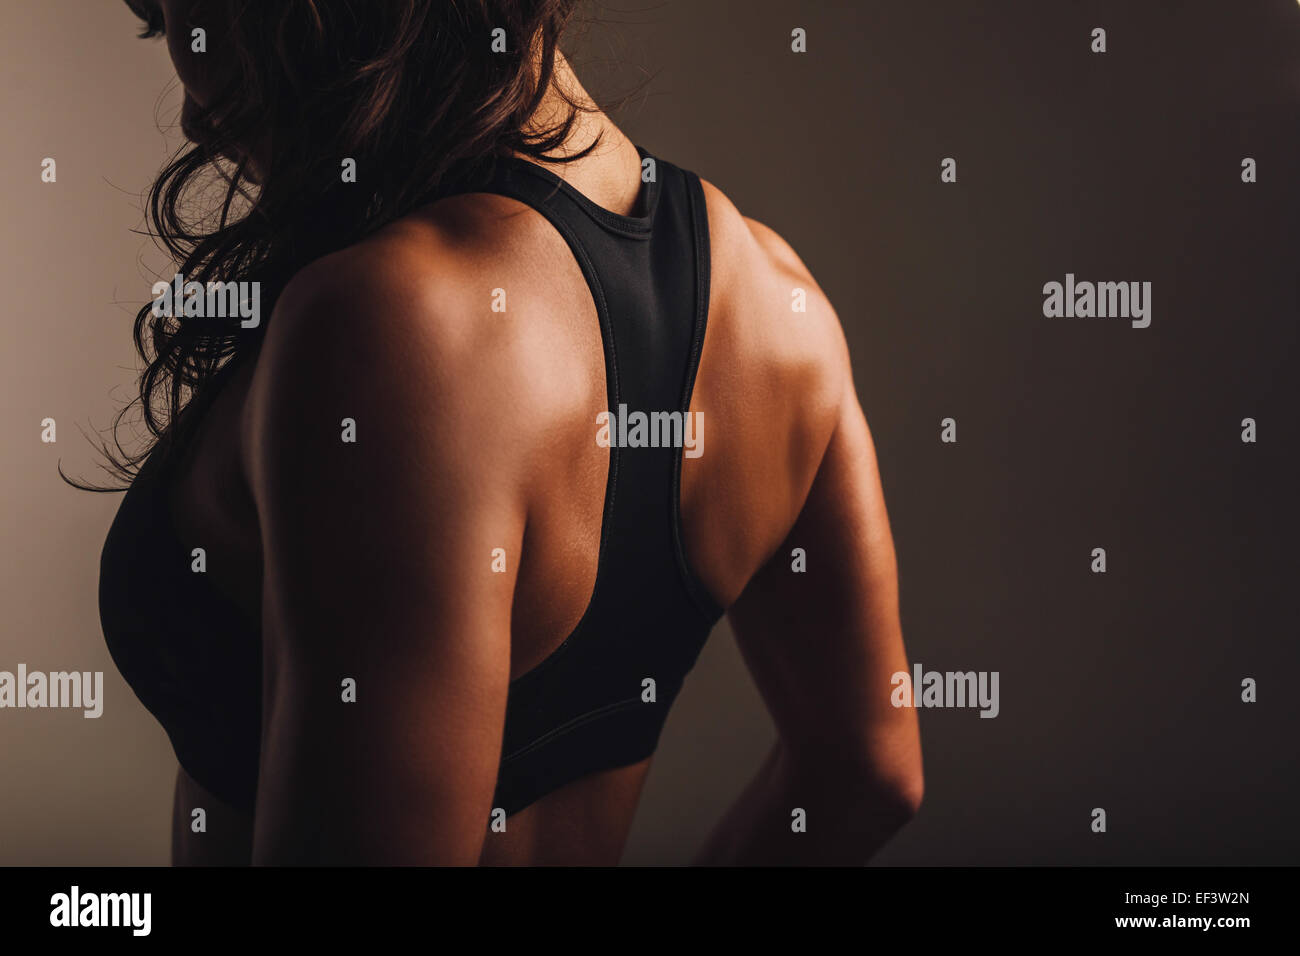 Rear view of strong young woman wearing sports bra. Muscular back of a woman  in sportswear Stock Photo - Alamy